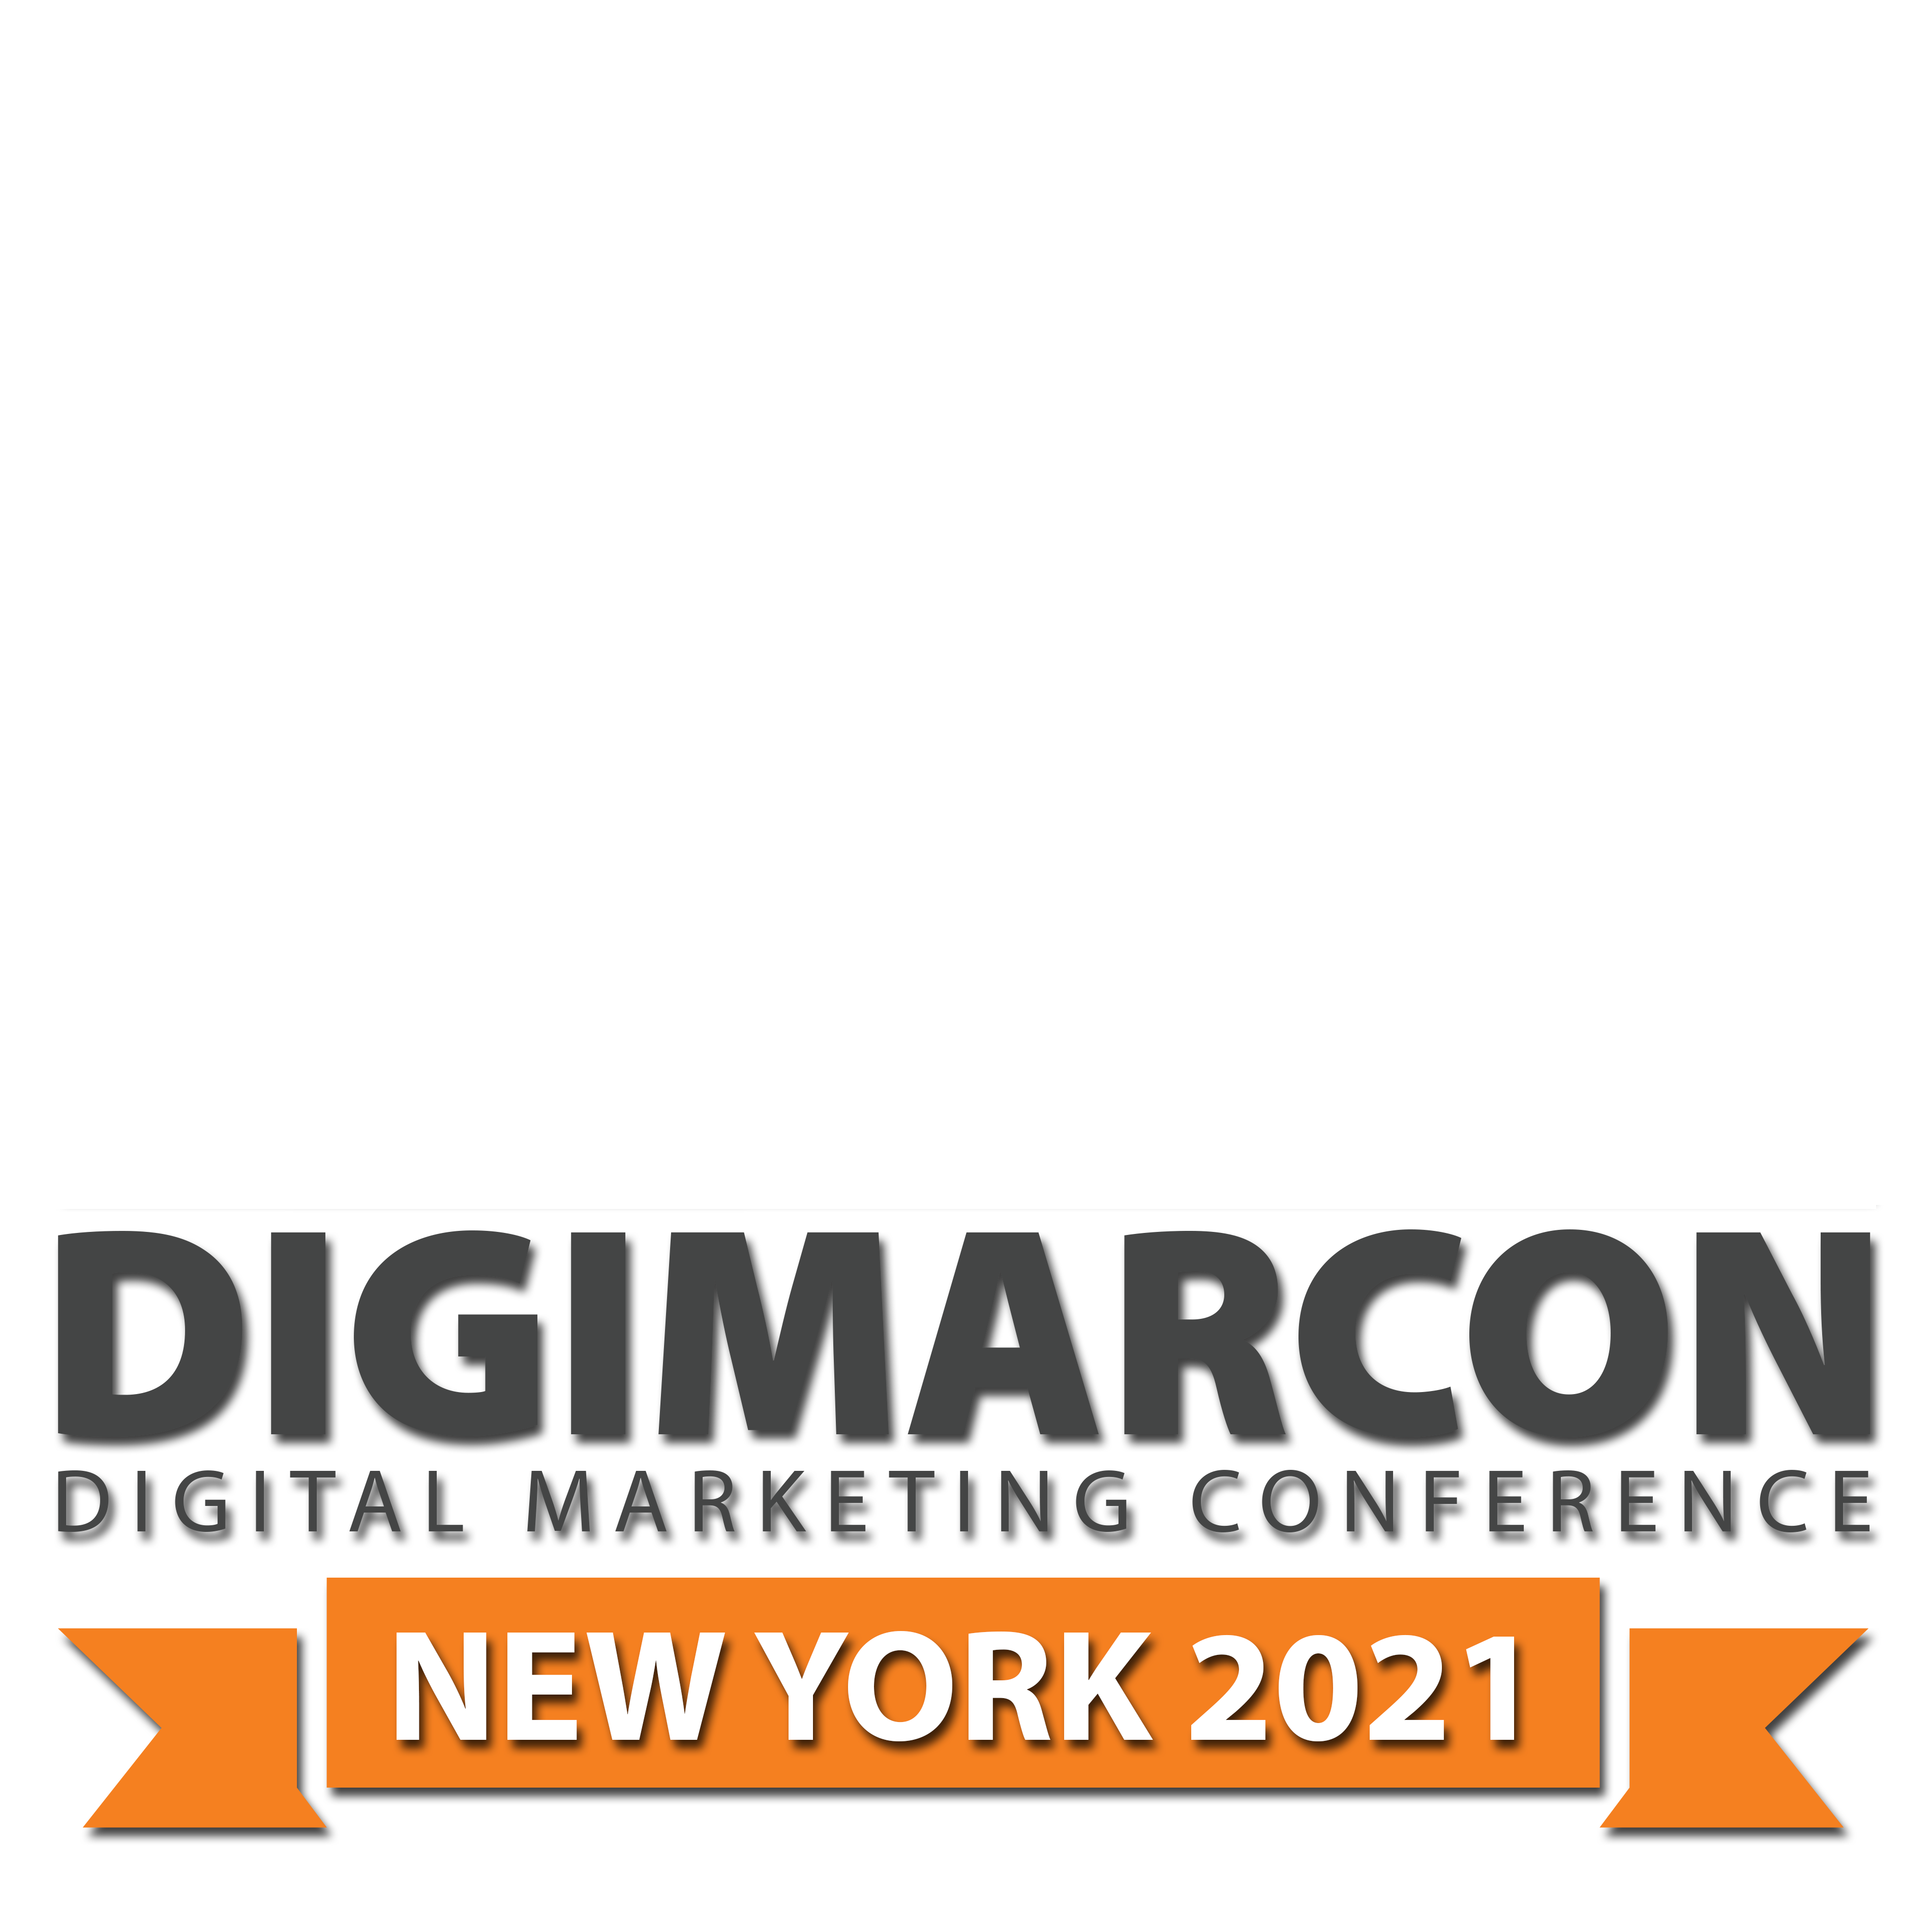 New York Digital Marketing, Media and Advertising Conference